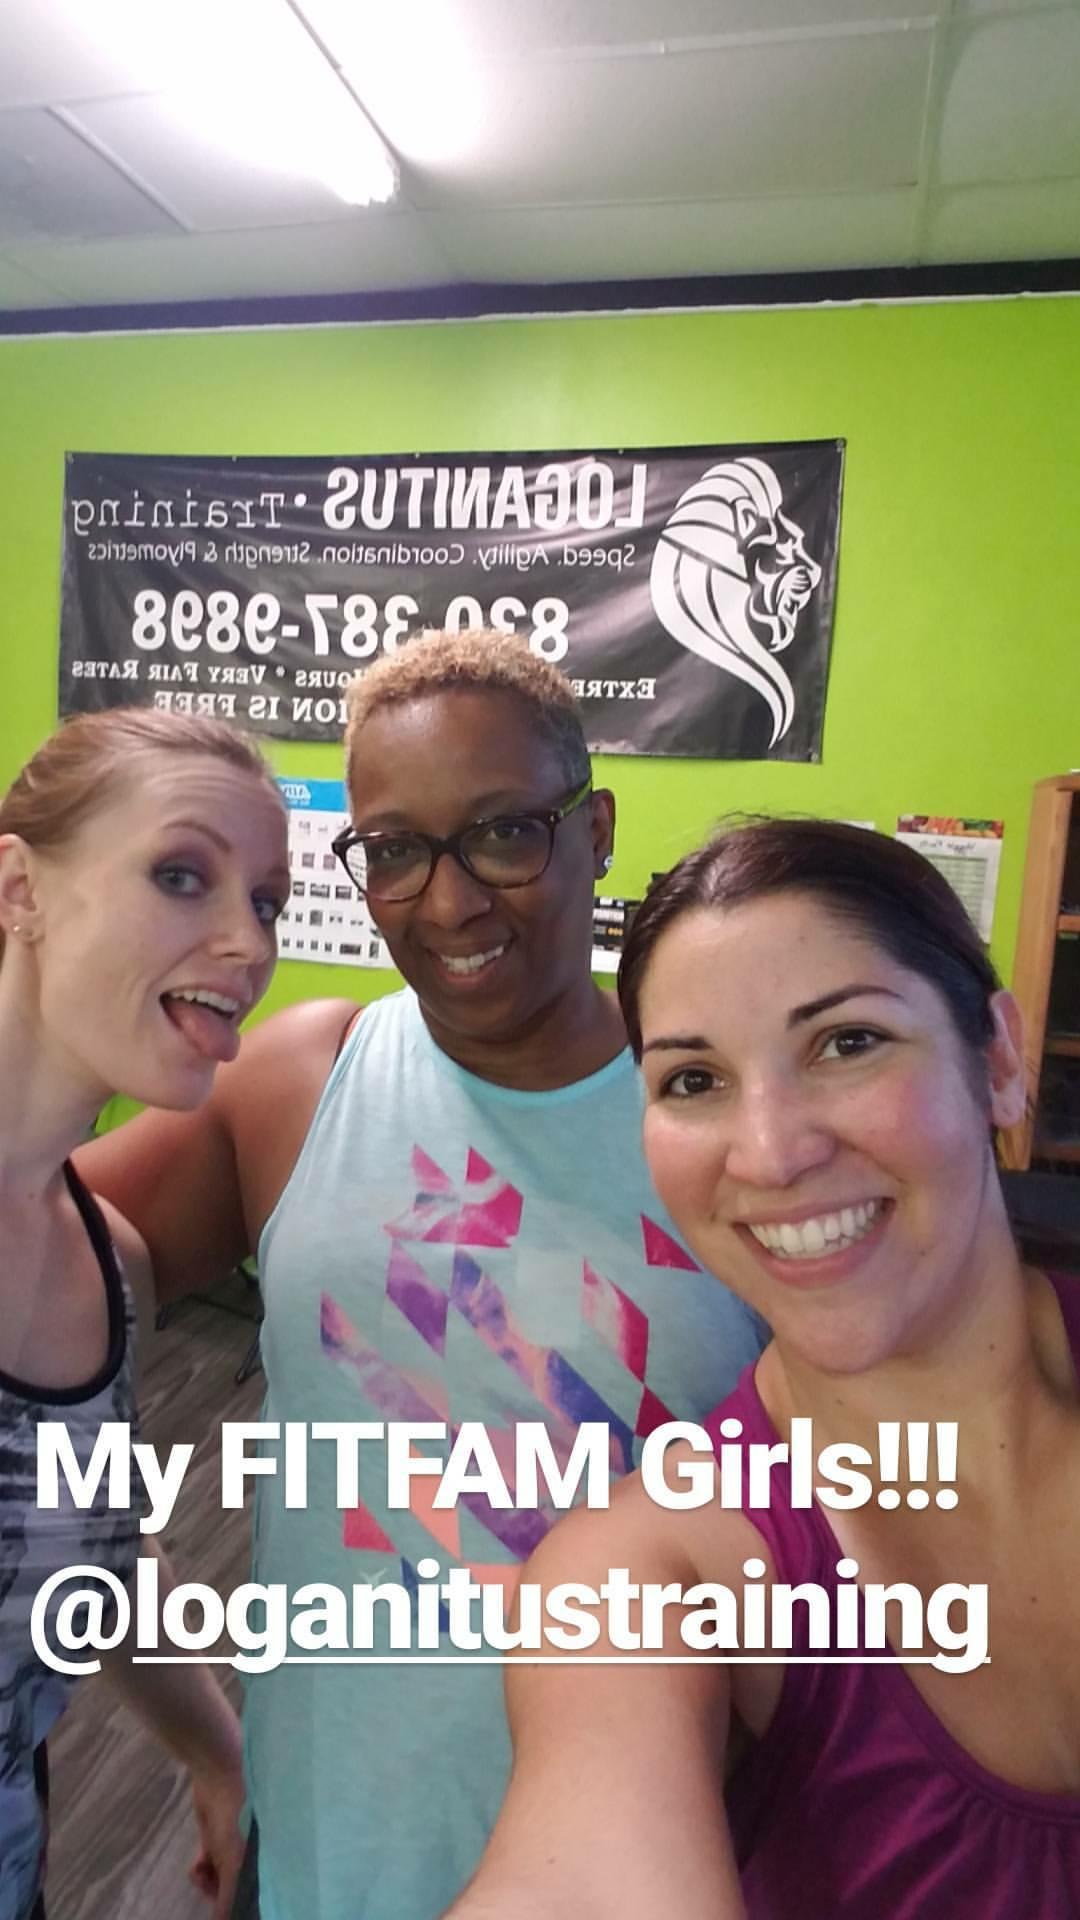 Coppelia and her FitFam girls at Loganitus Training bootcamp!